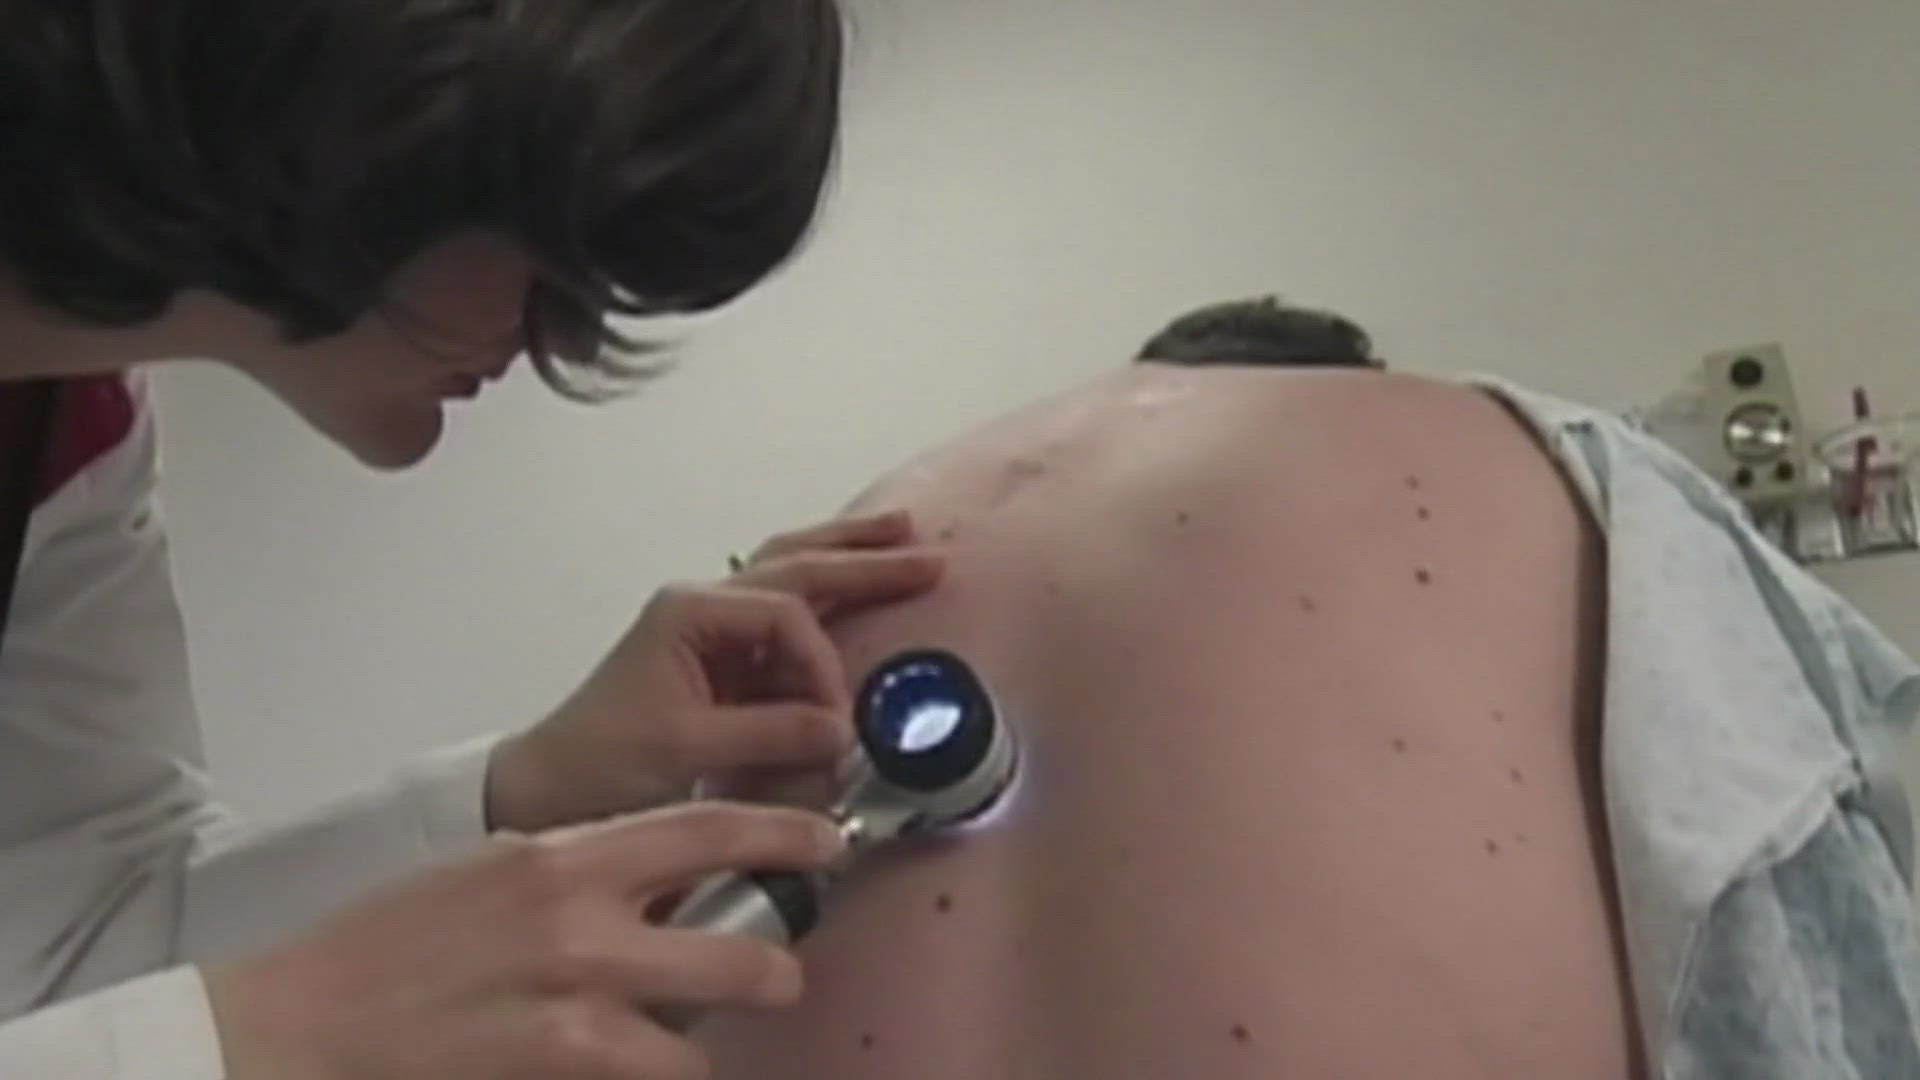 Melanoma is the deadliest form of skin cancer, and it's estimated 100,000 Americans will be diagnosed this year. Cleveland Clinic is offering a new treatment.